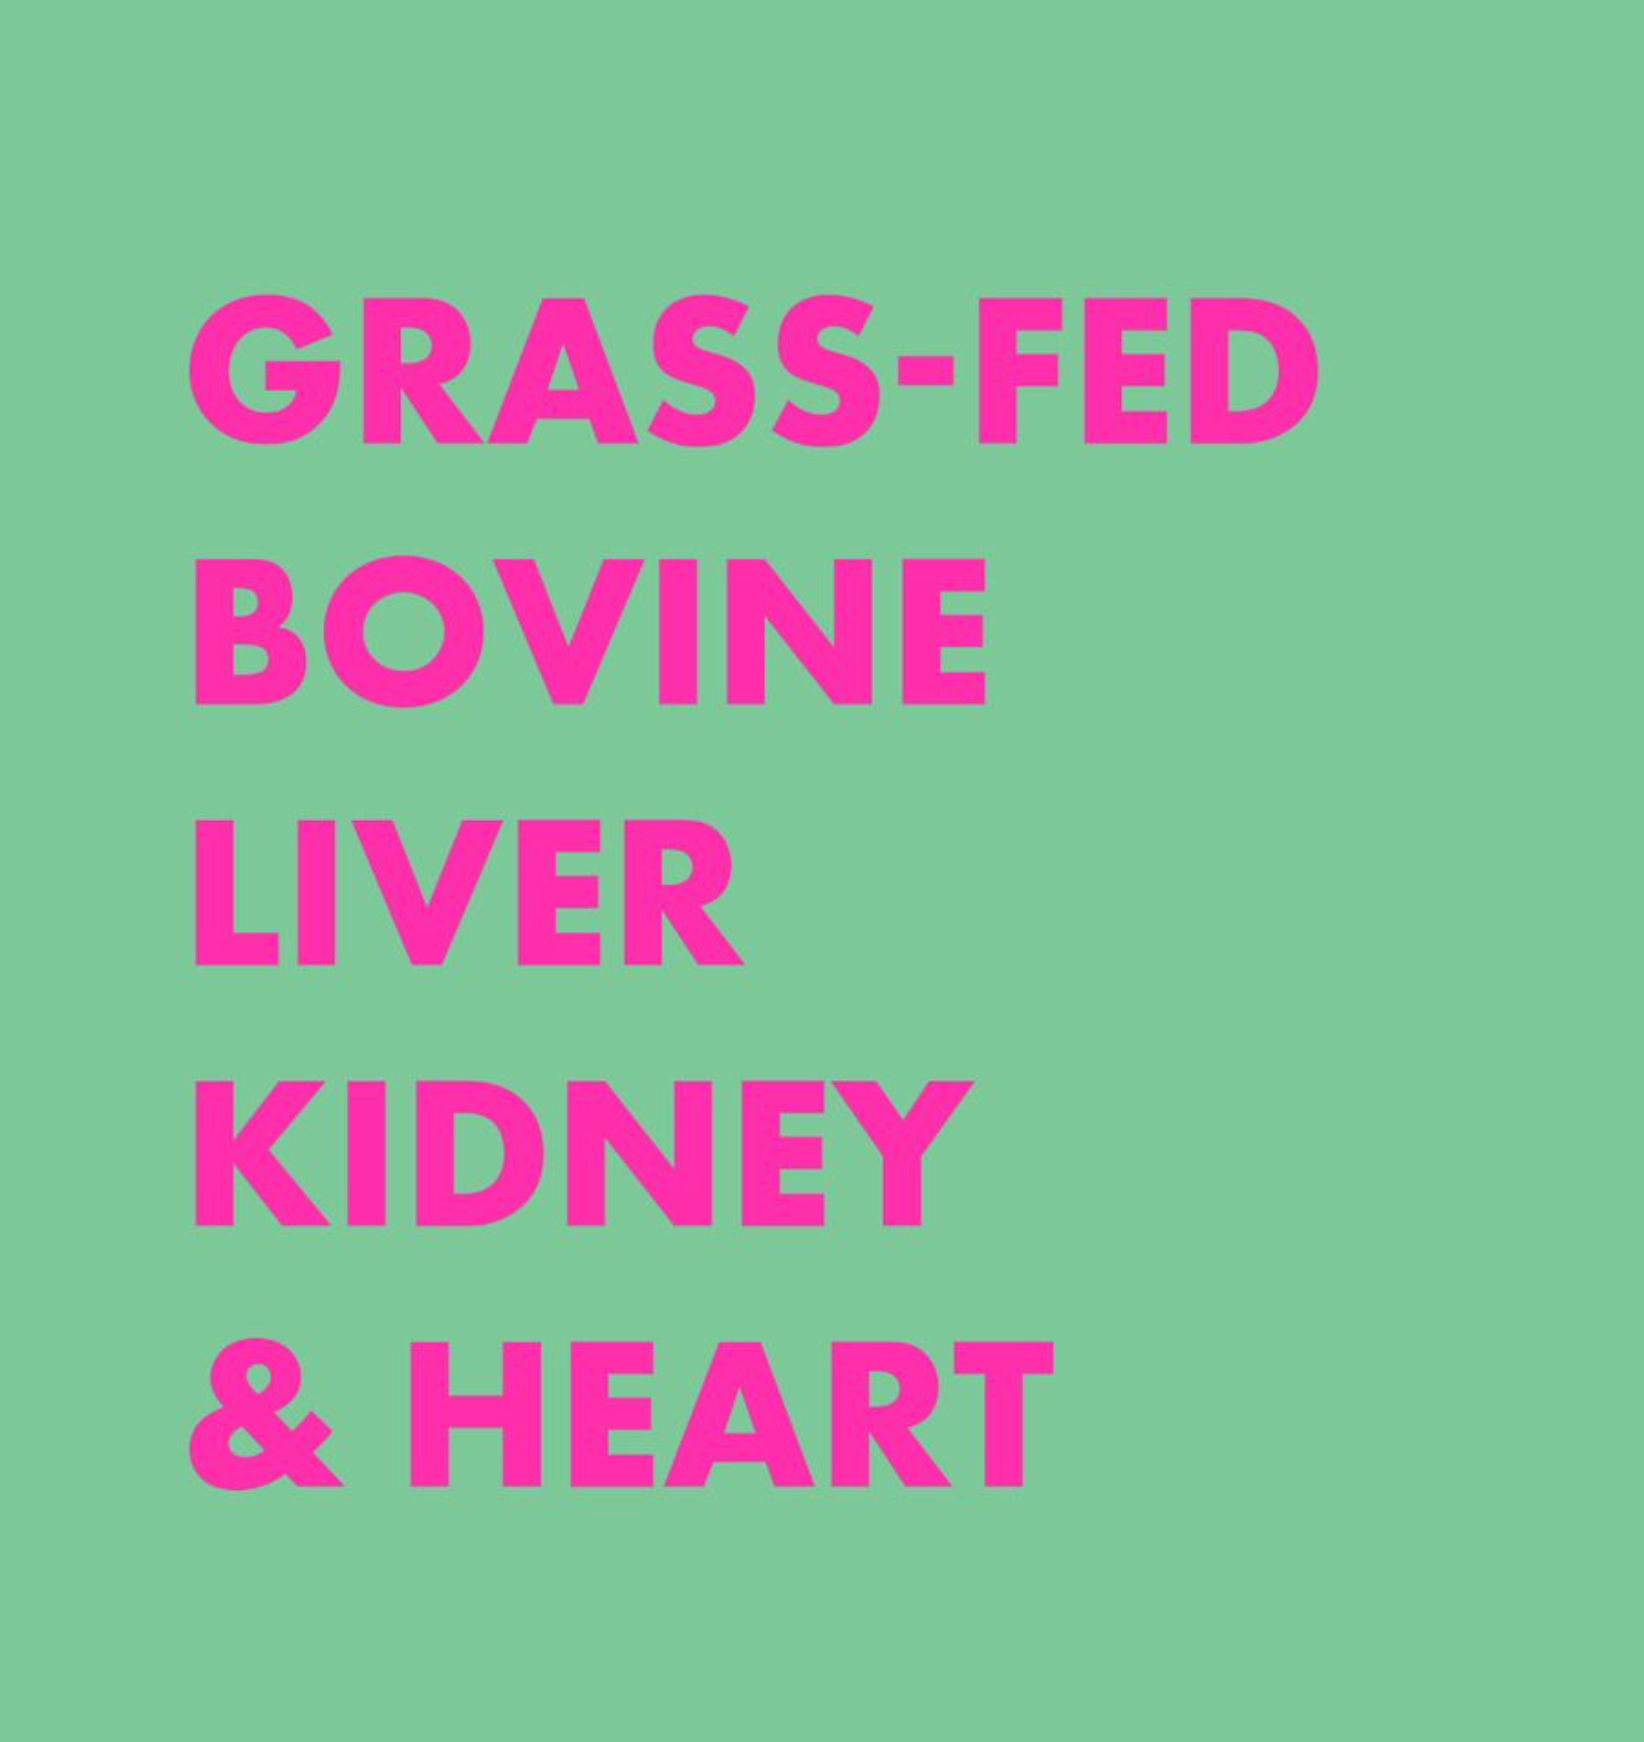 THRIVE - GRASS FED BEEF LIVER, HEART & KIDNEY (Carnicopia)